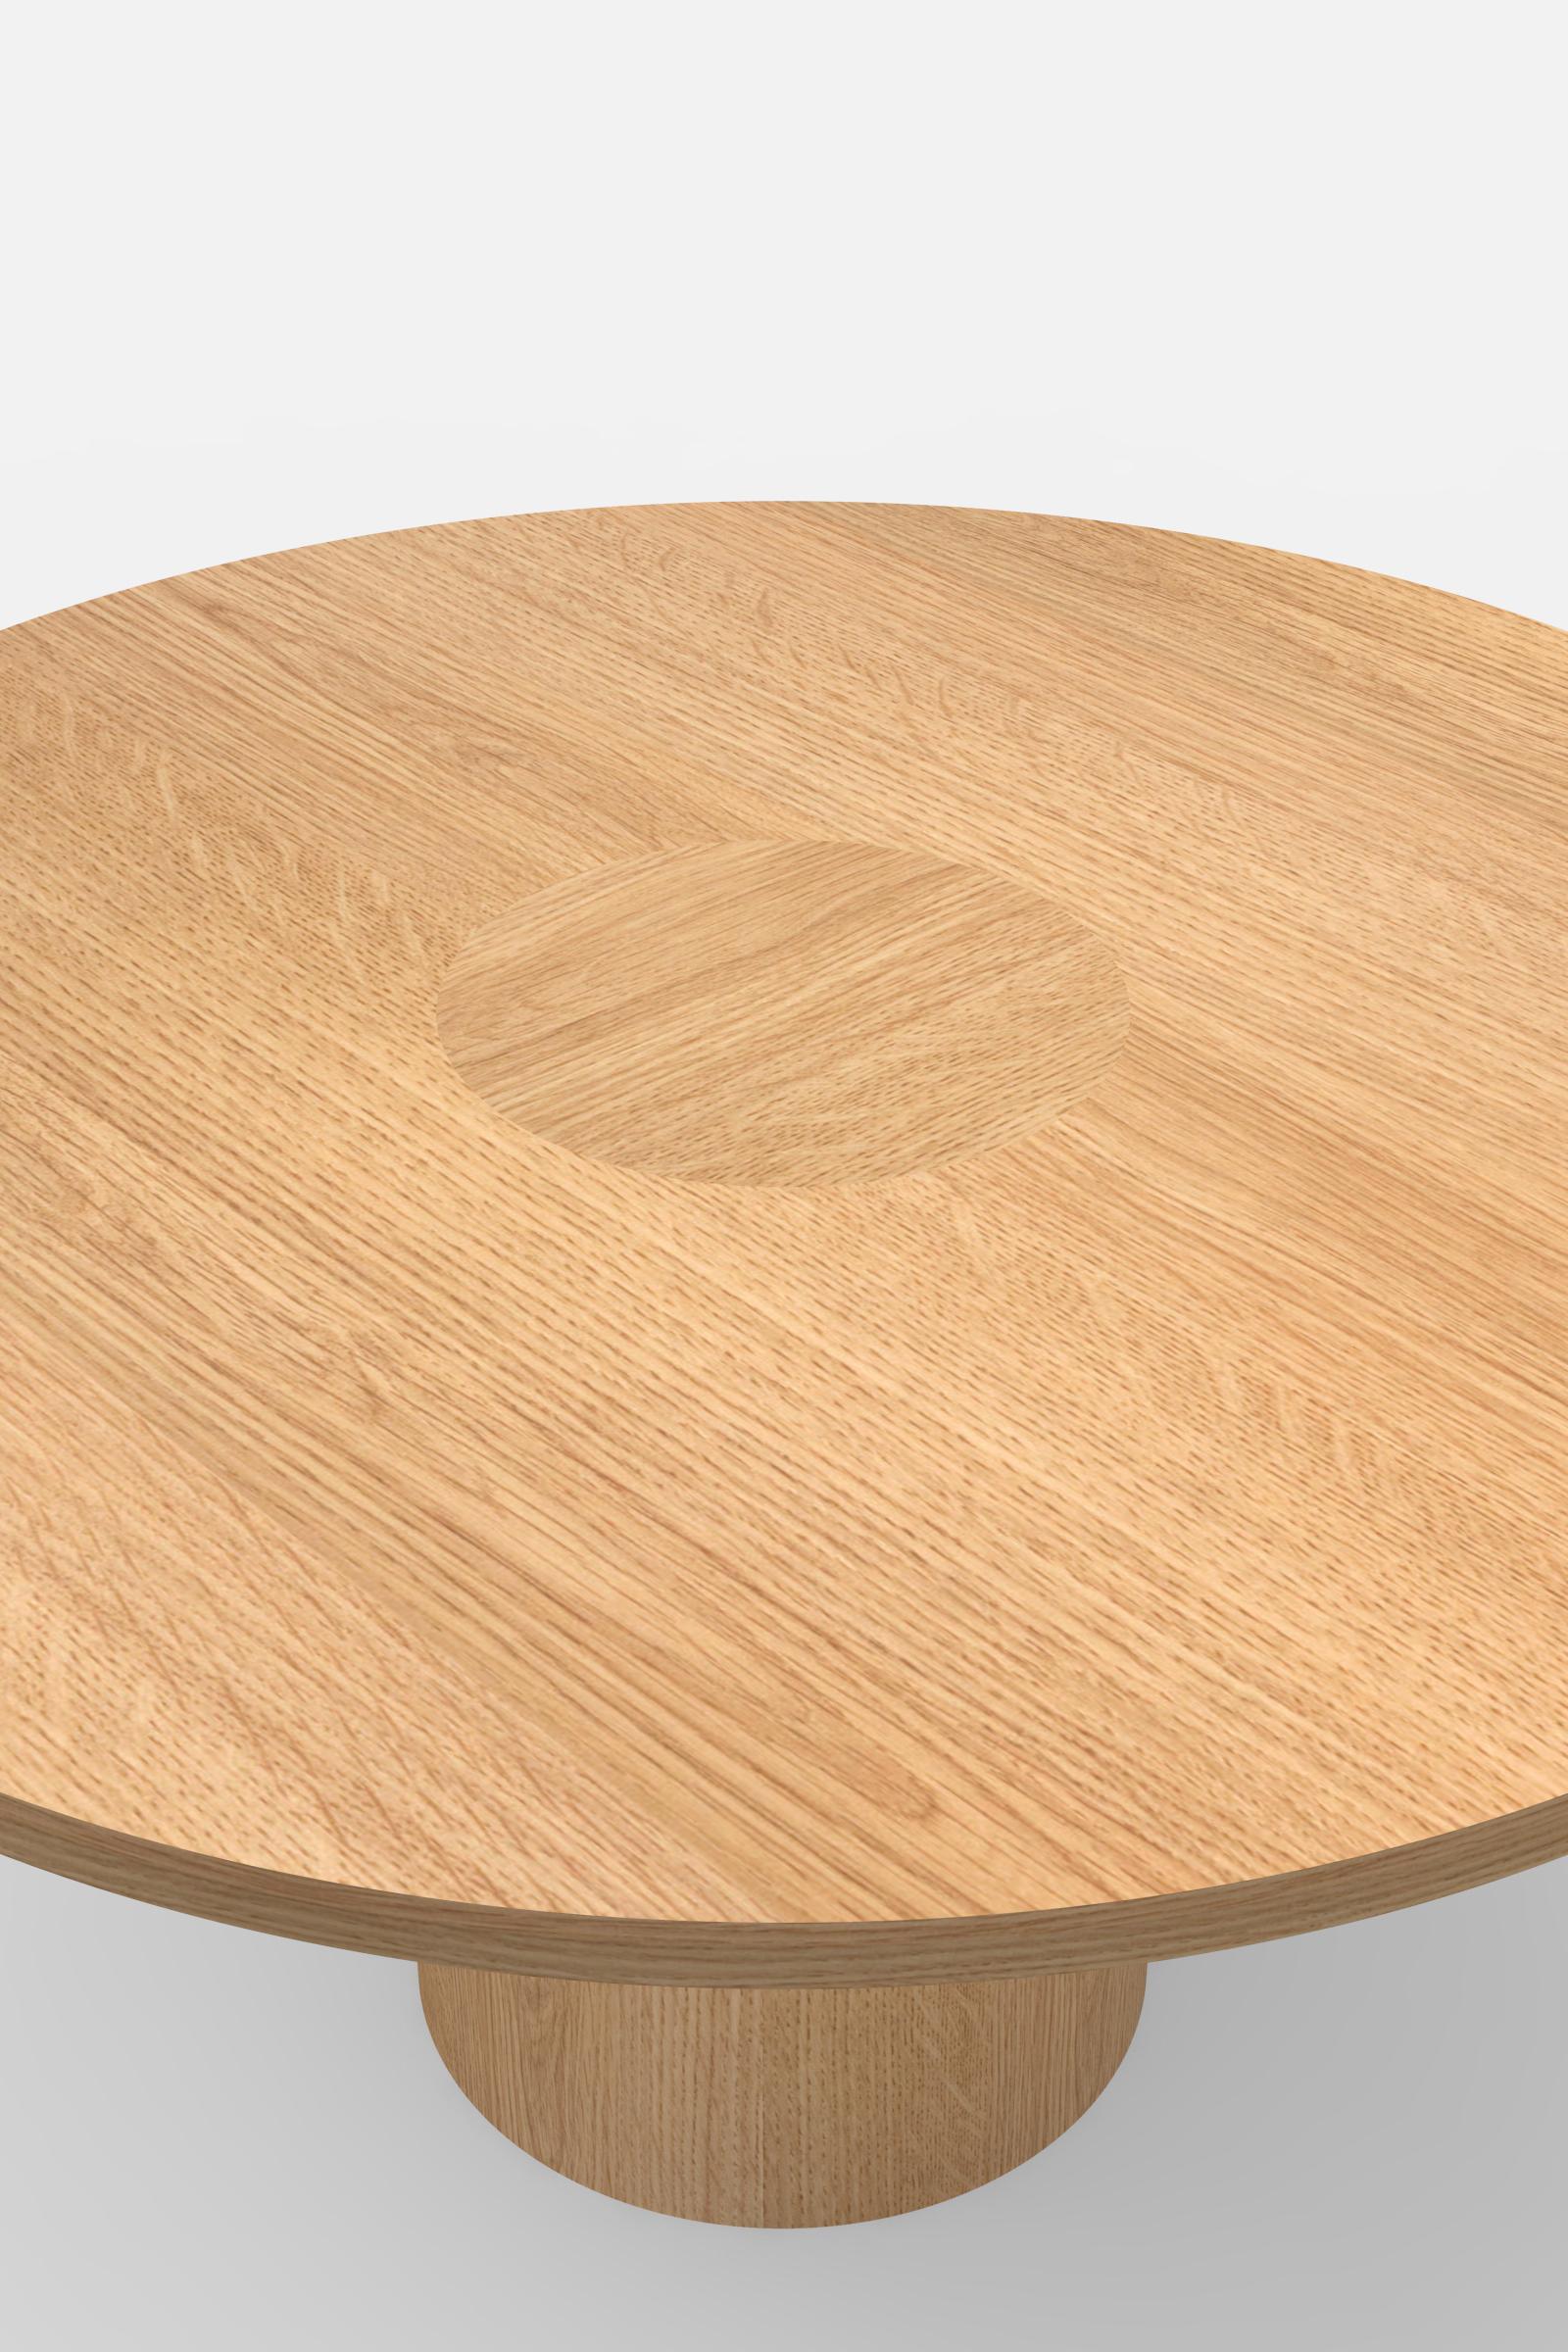 Post-Modern Contemporary 100 Coffee Table in Oak by Orphan Work - Second Deposit For Sale